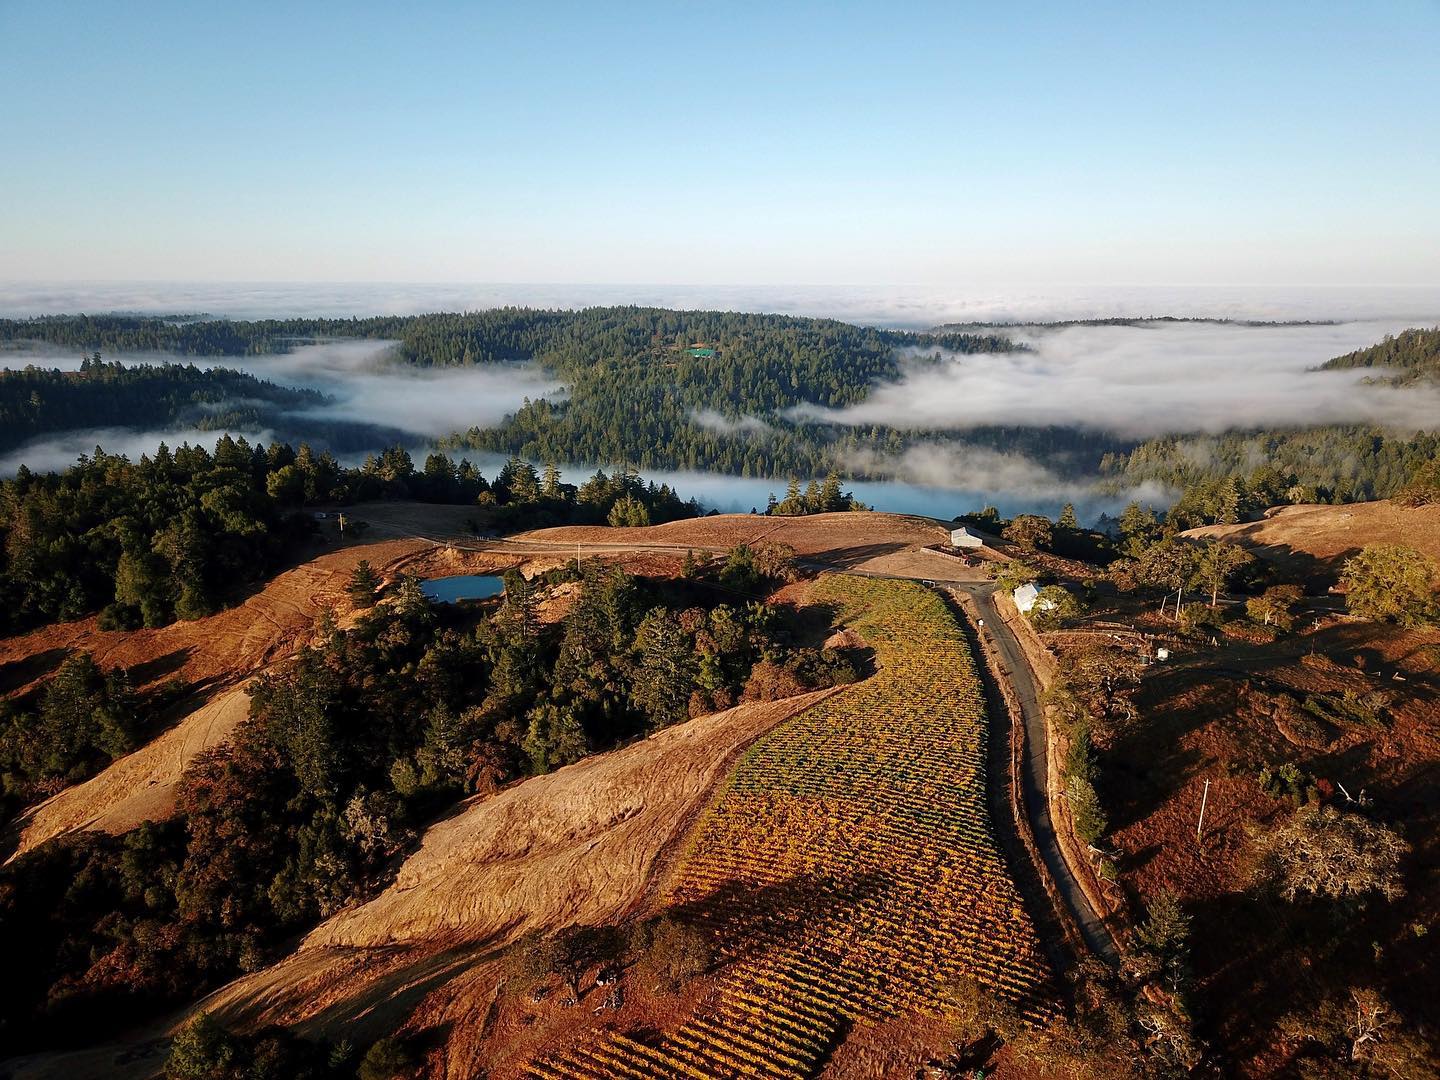 Ariel view of vineyard, redwoods, and fog on the horizon